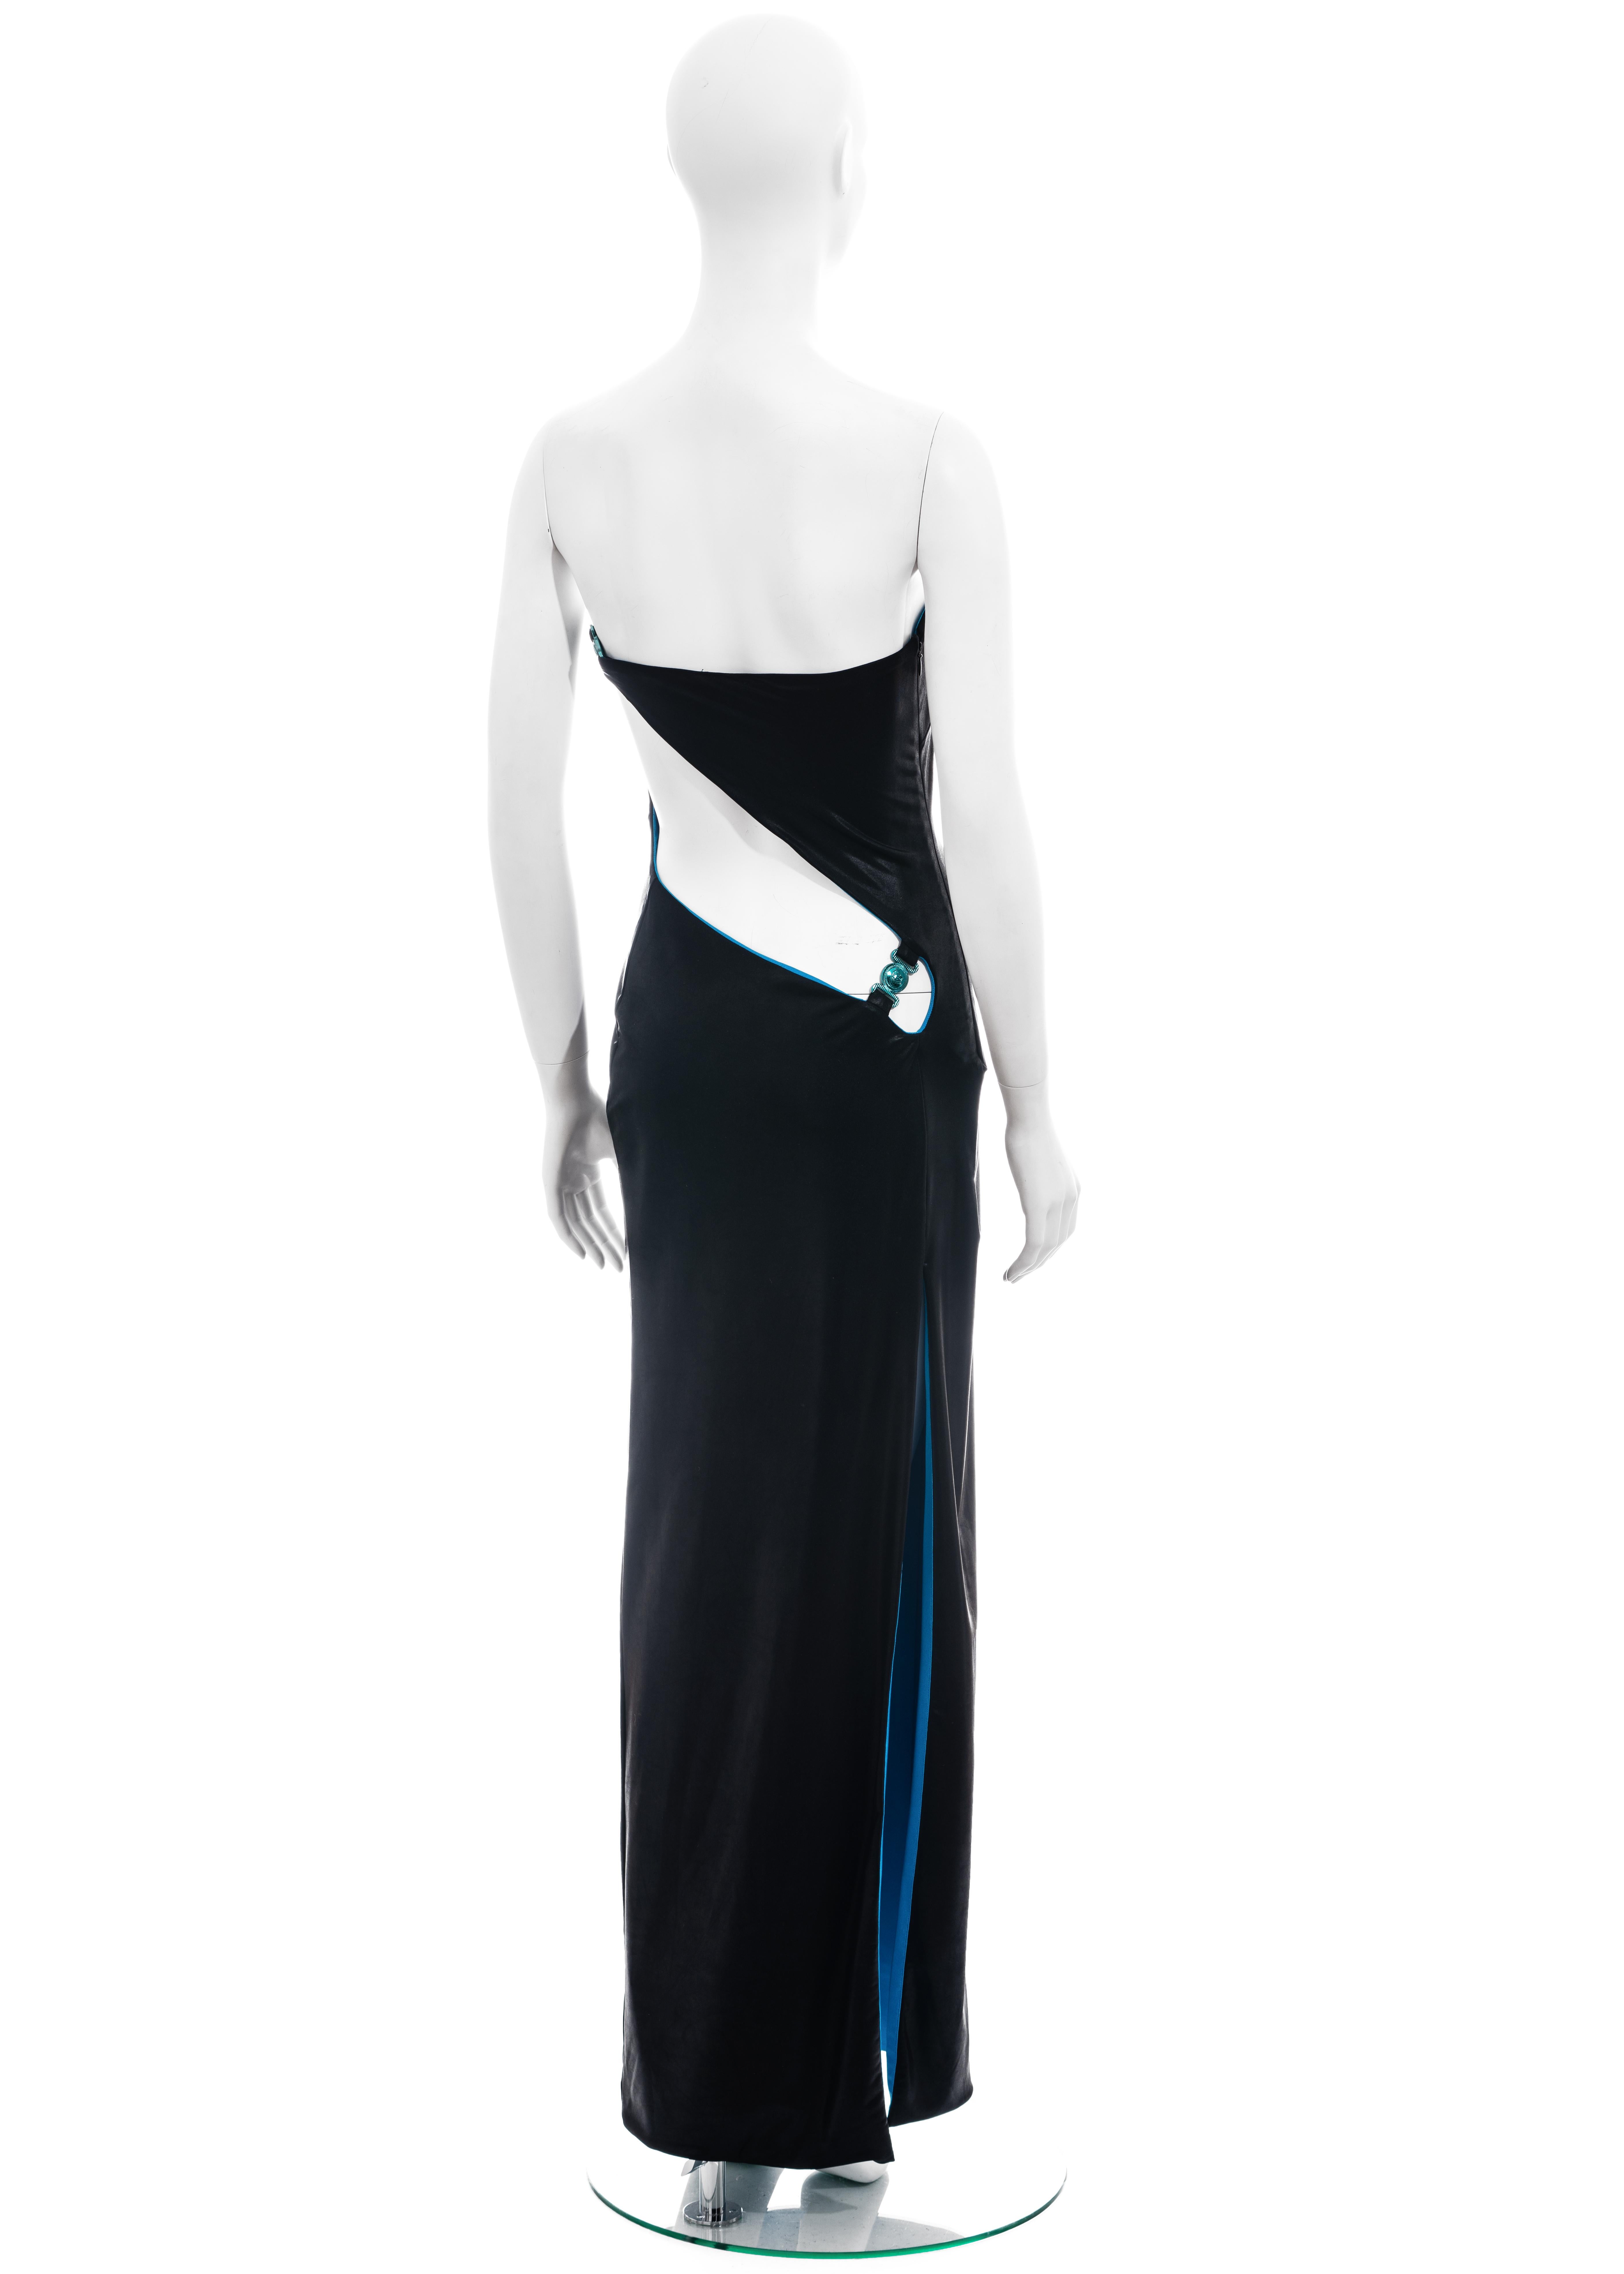 Women's Gianni Versace black and electric blue strapless maxi dress, ss 1998